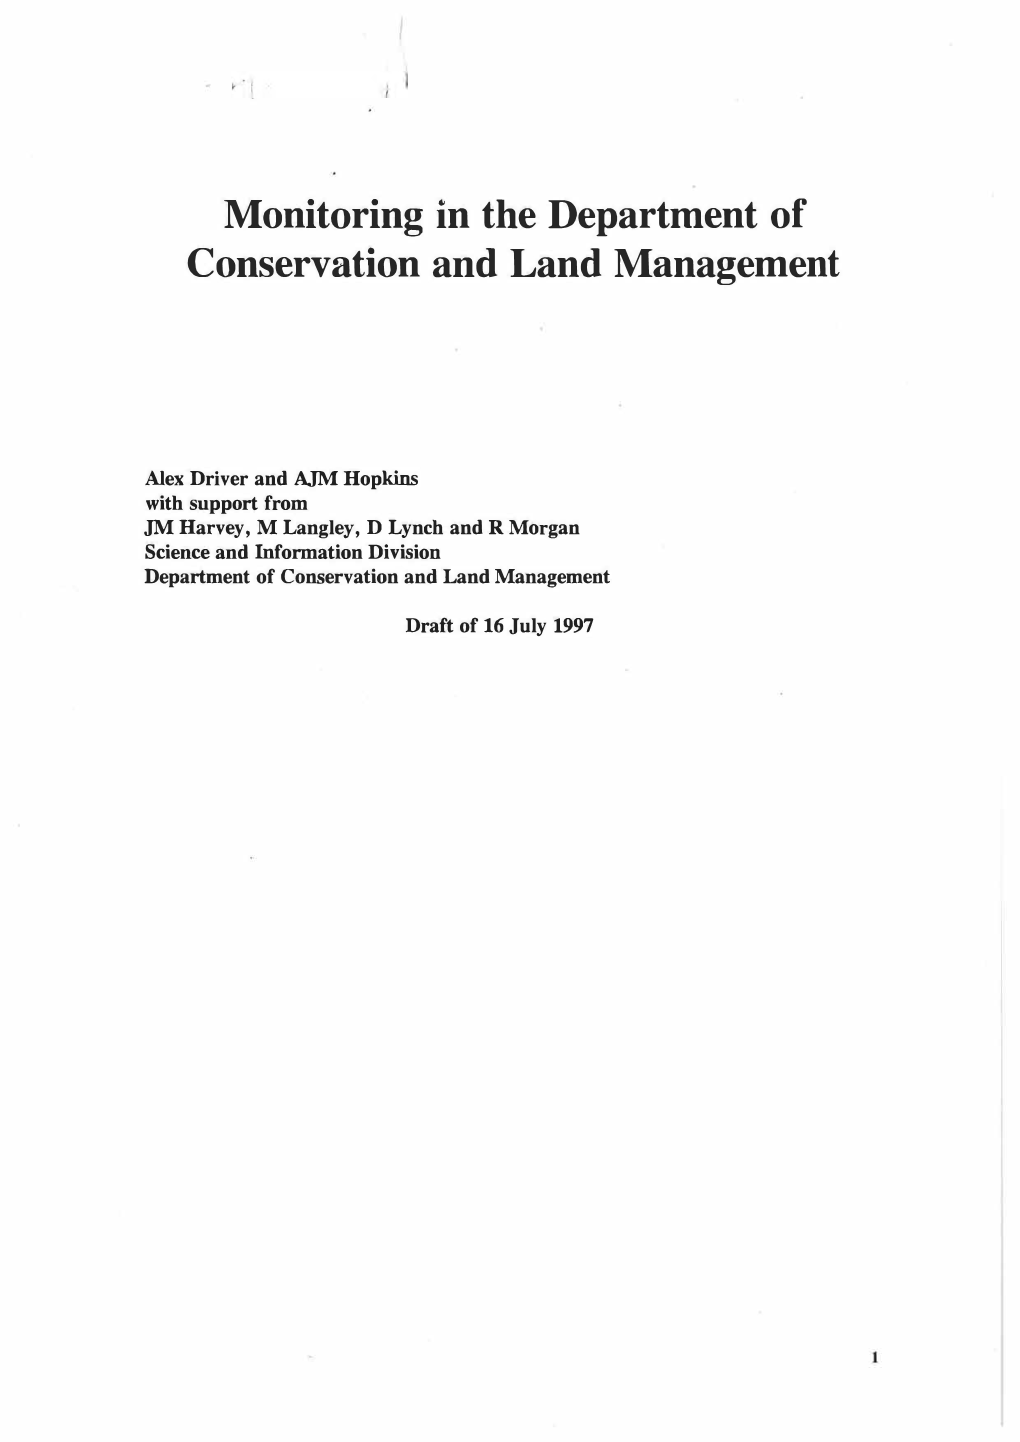 Monitoring in the Department of Conservation and Land Management